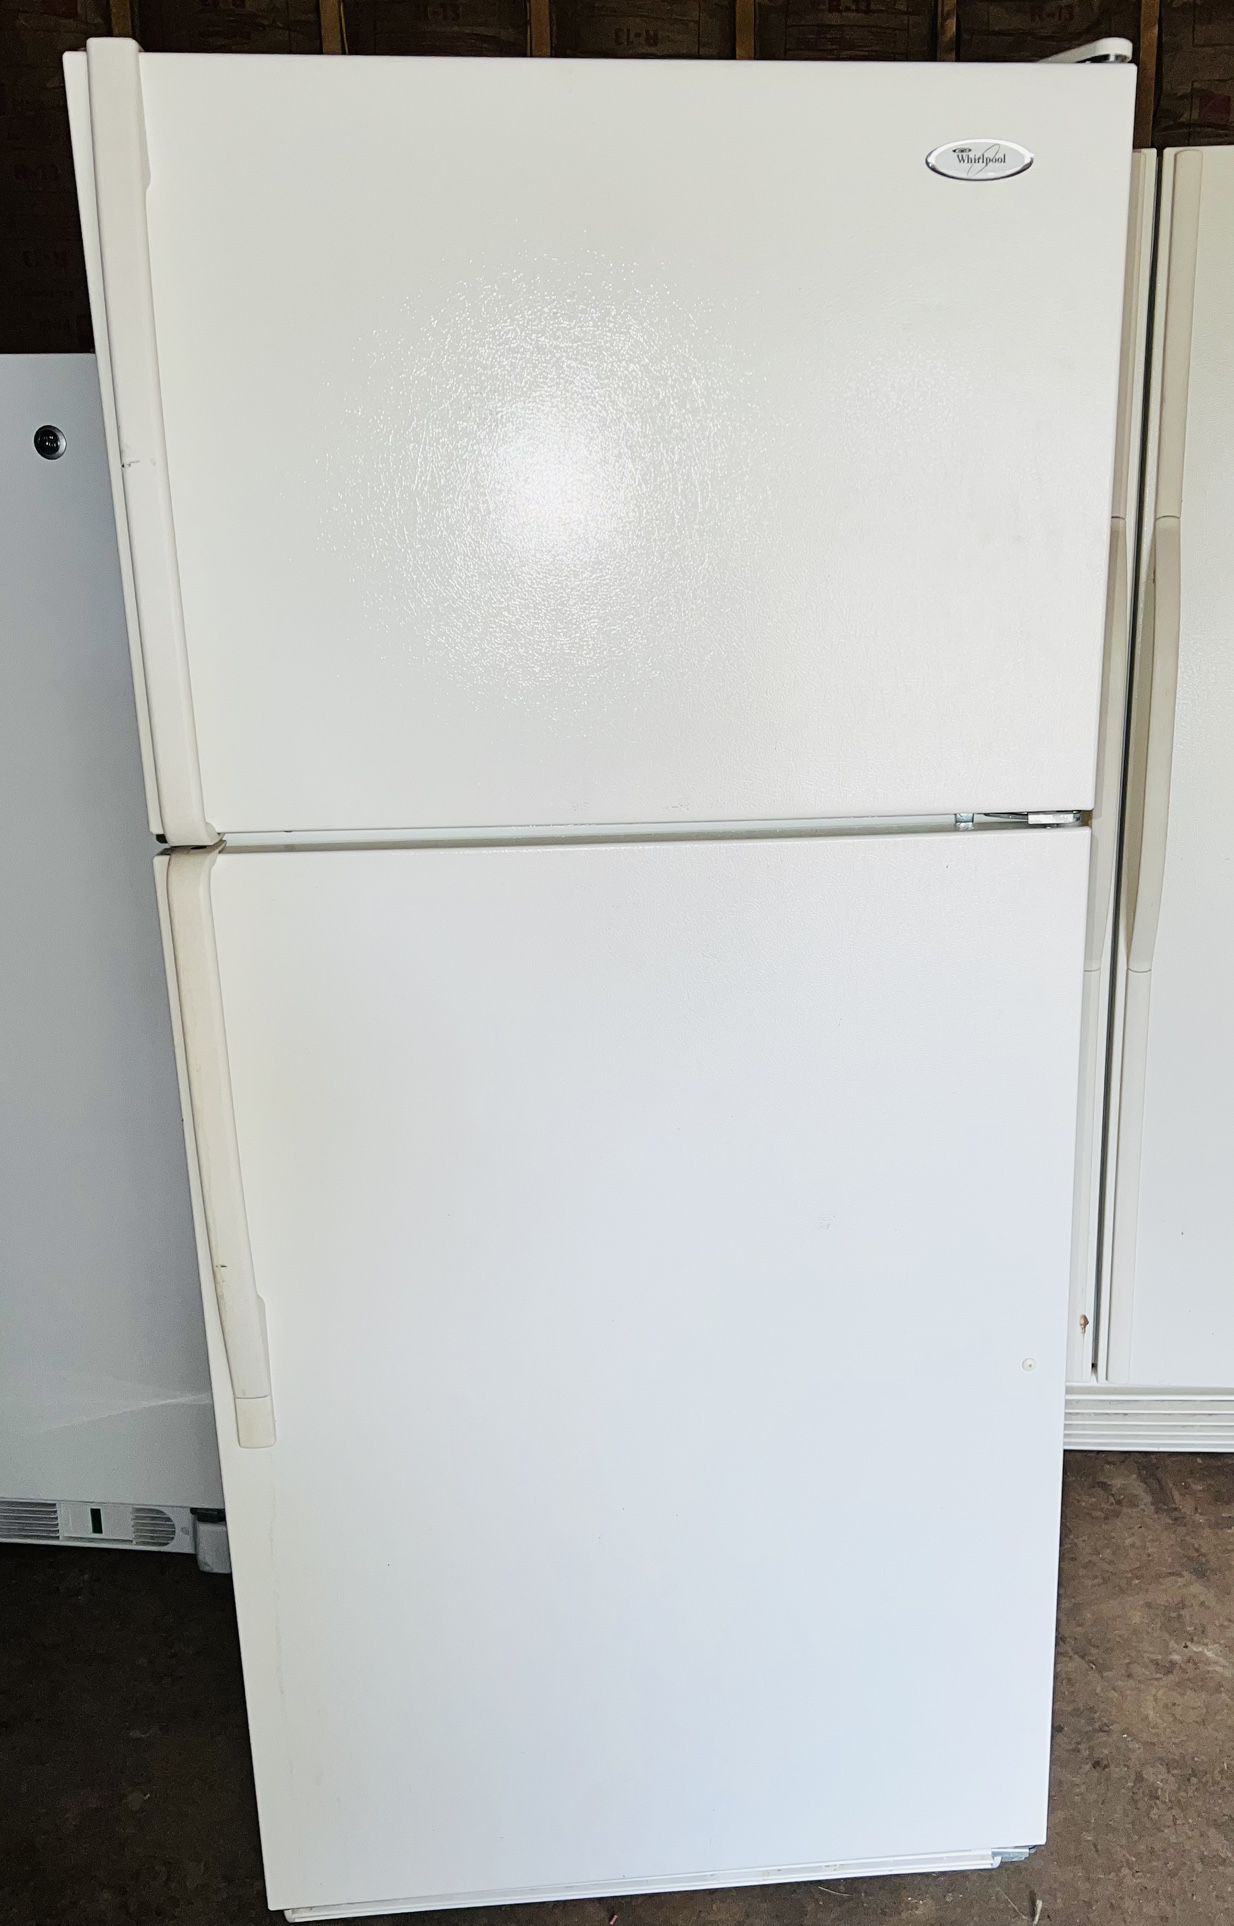 Very Nice ice maker whirlpool refrigerator Everything Work Very Good Only Only$280